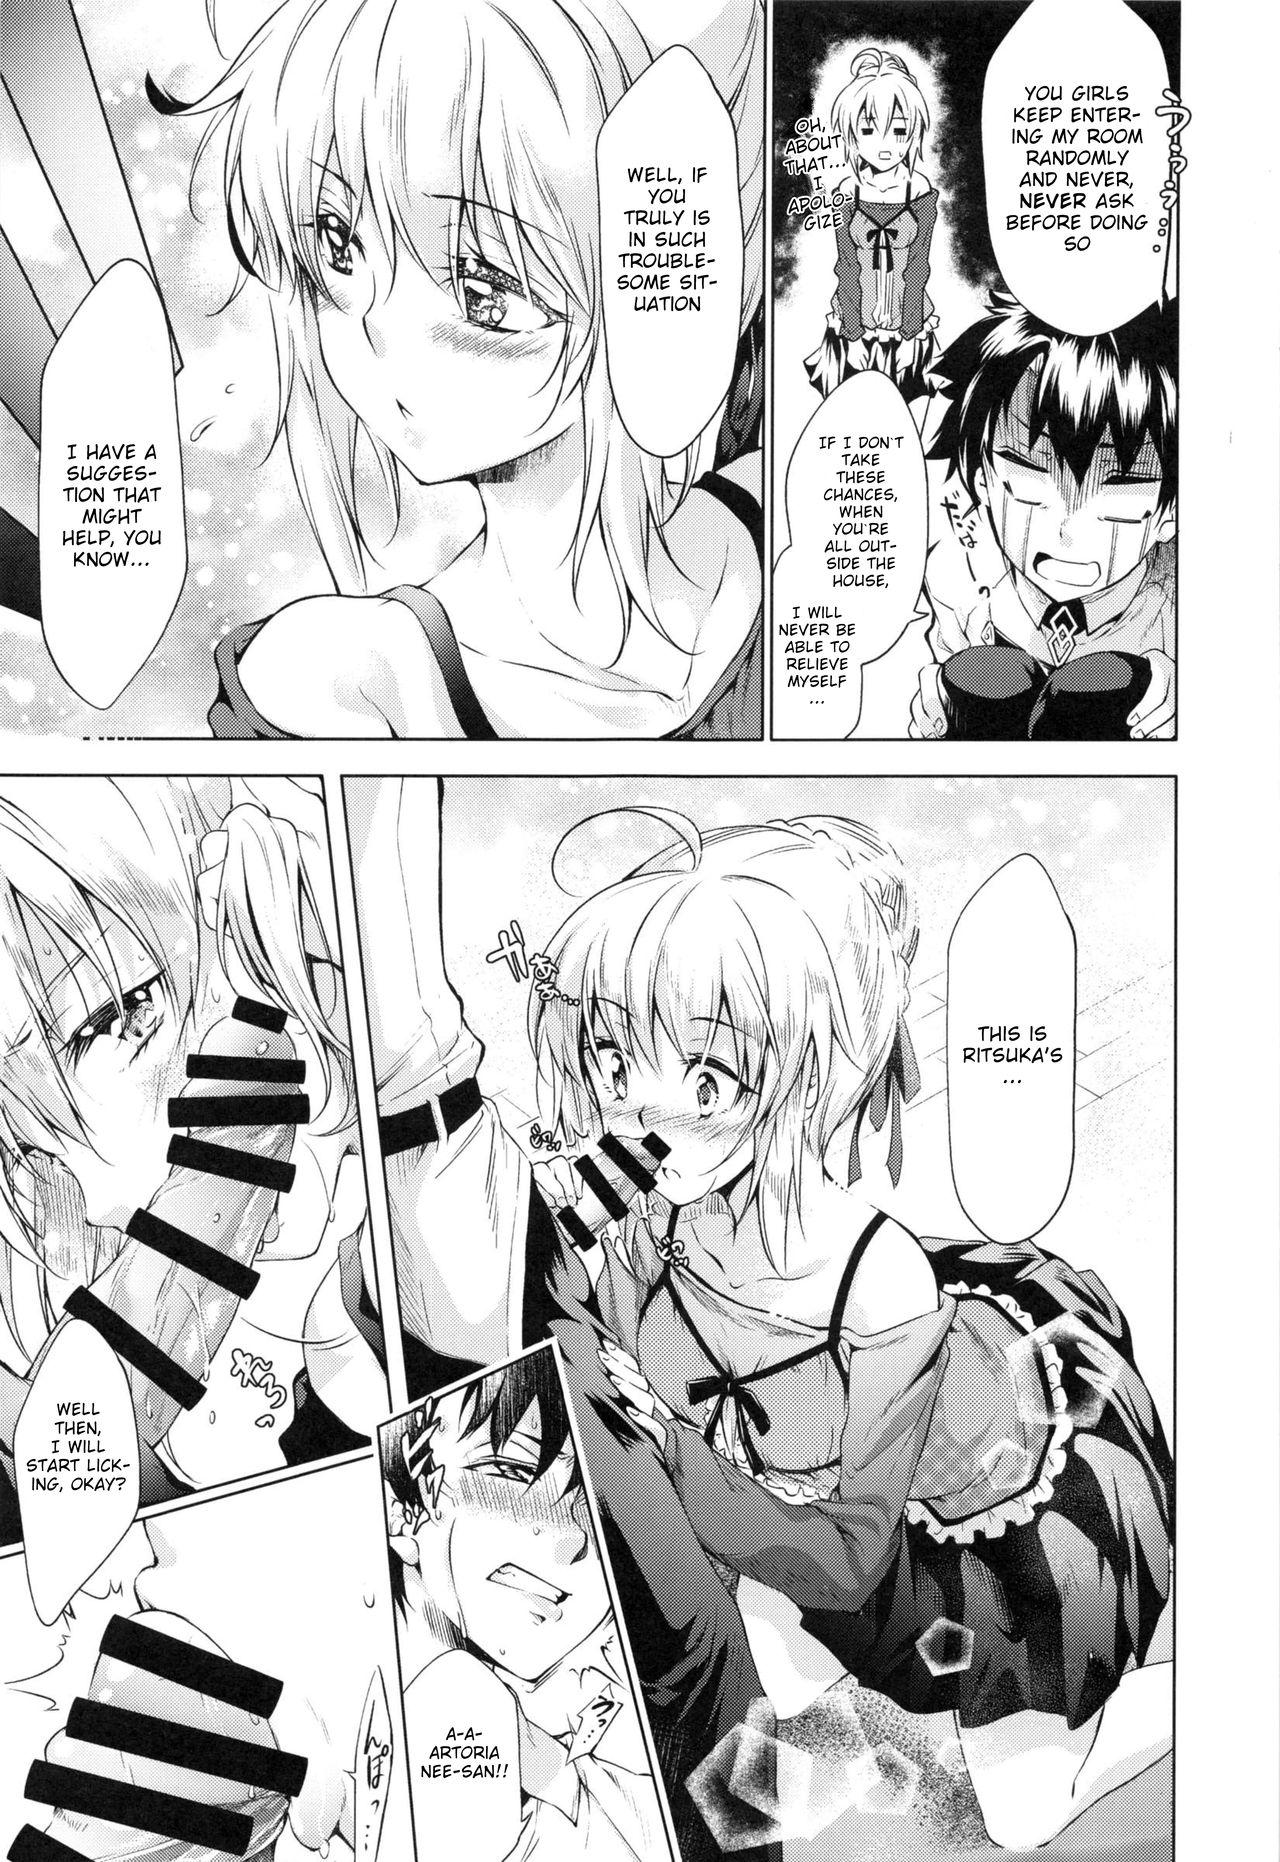 Passion Pendra-ke no Seijijou | The sexual situation of the Pendragon house - Fate grand order Argenta - Page 10